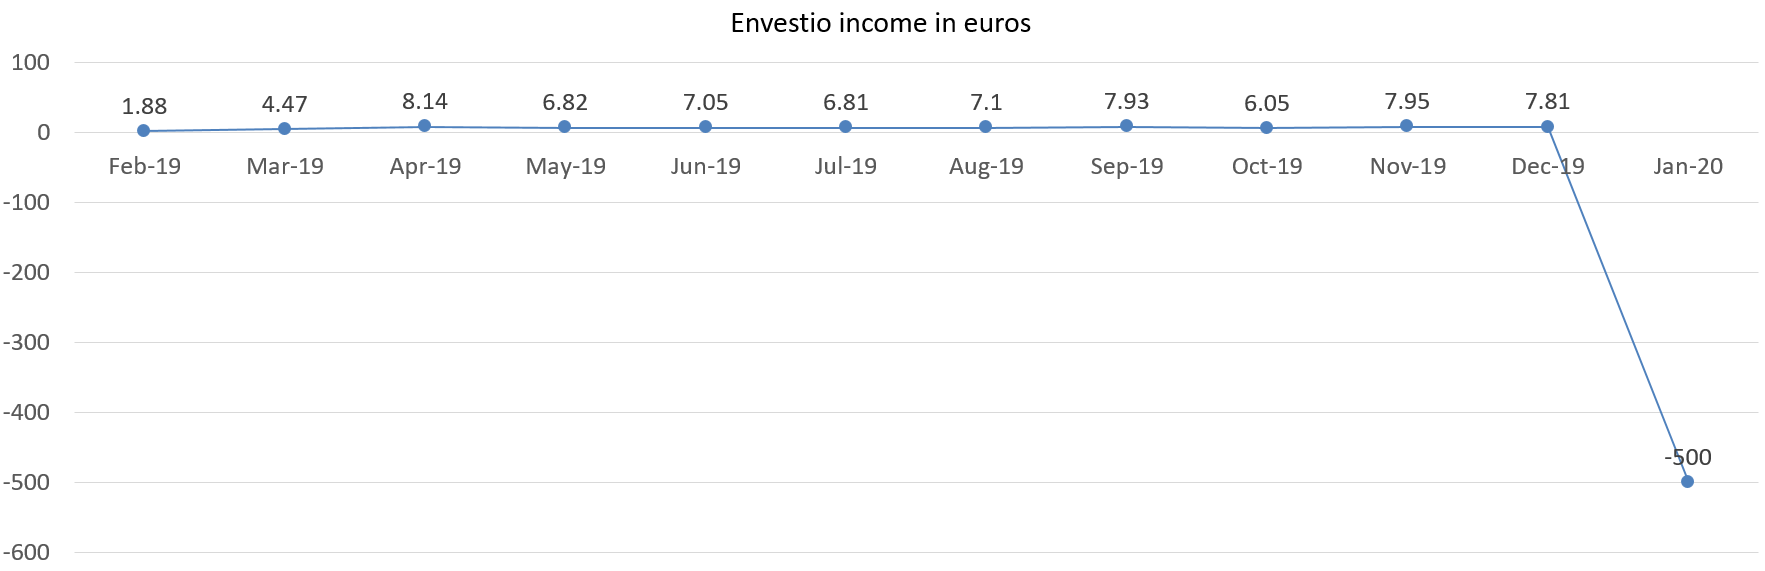 Envestio income in euros january 2020